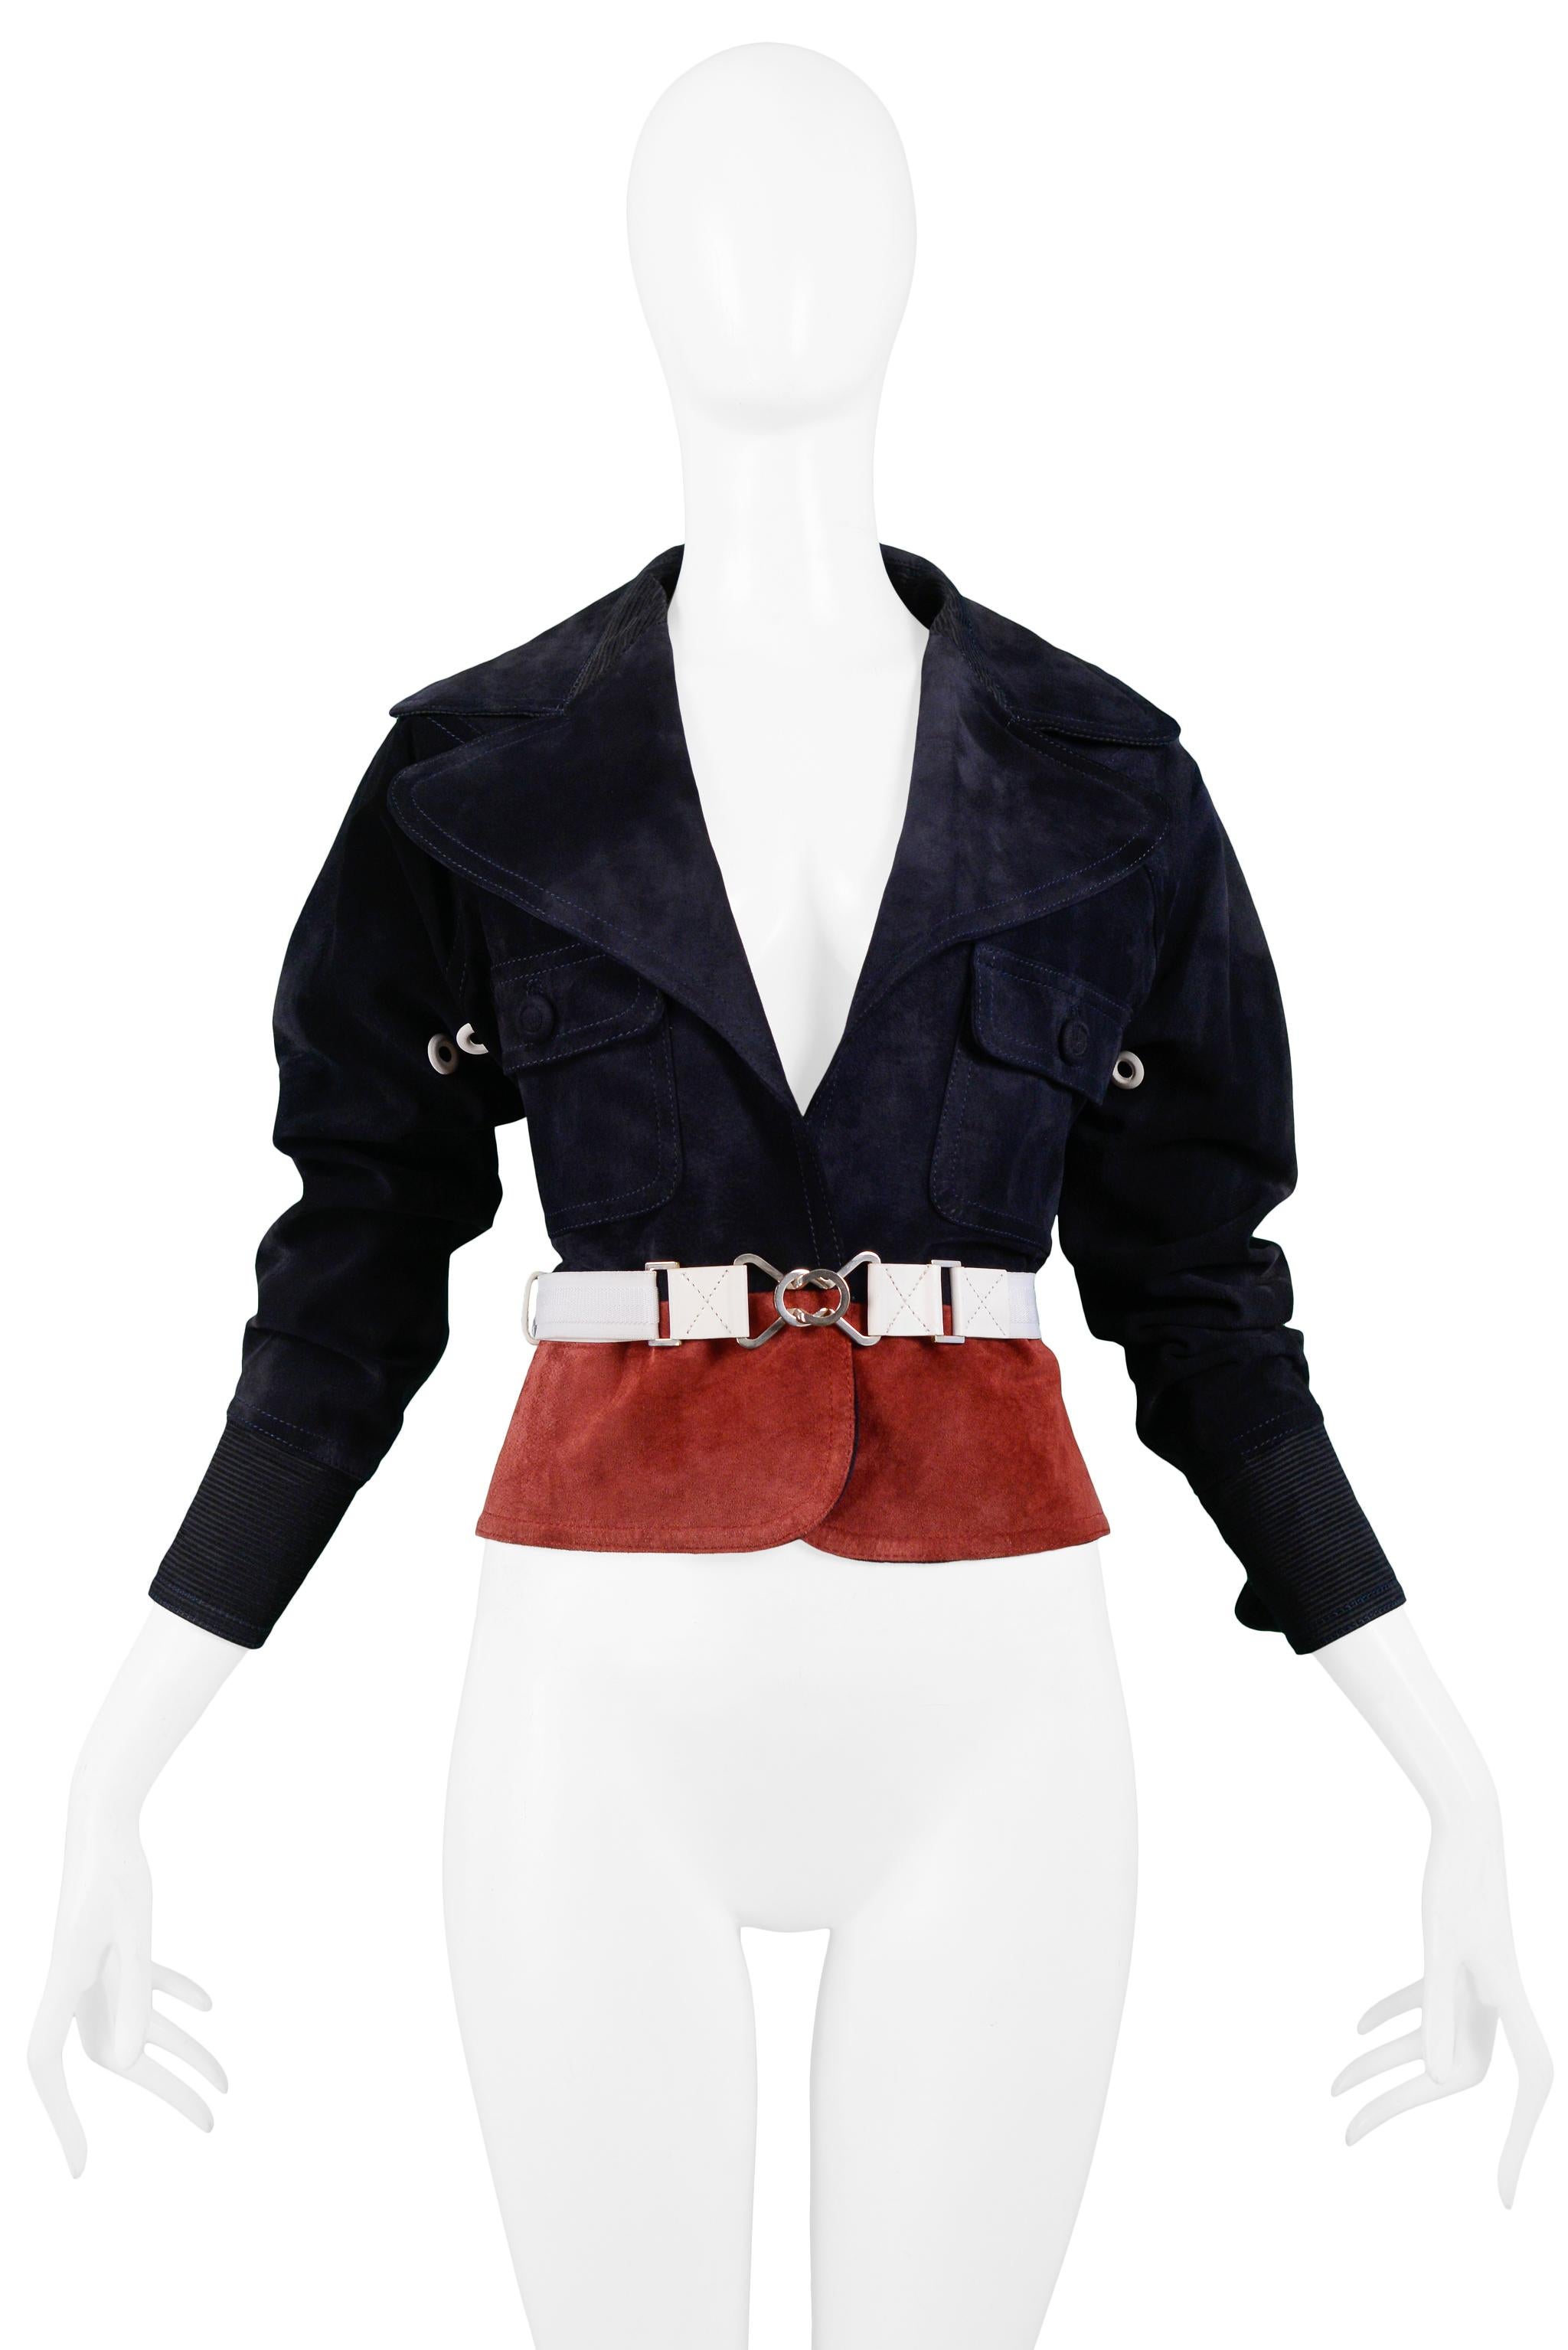 Resurrection Vintage is excited to offer a vintage Gianfranco Ferre navy suede jacket featuring burgundy suede waist panel, white belt with silver-tone metal, large front pockets, white grommets, and wide lapels.

Gianfranco Ferre Label
100% Pig